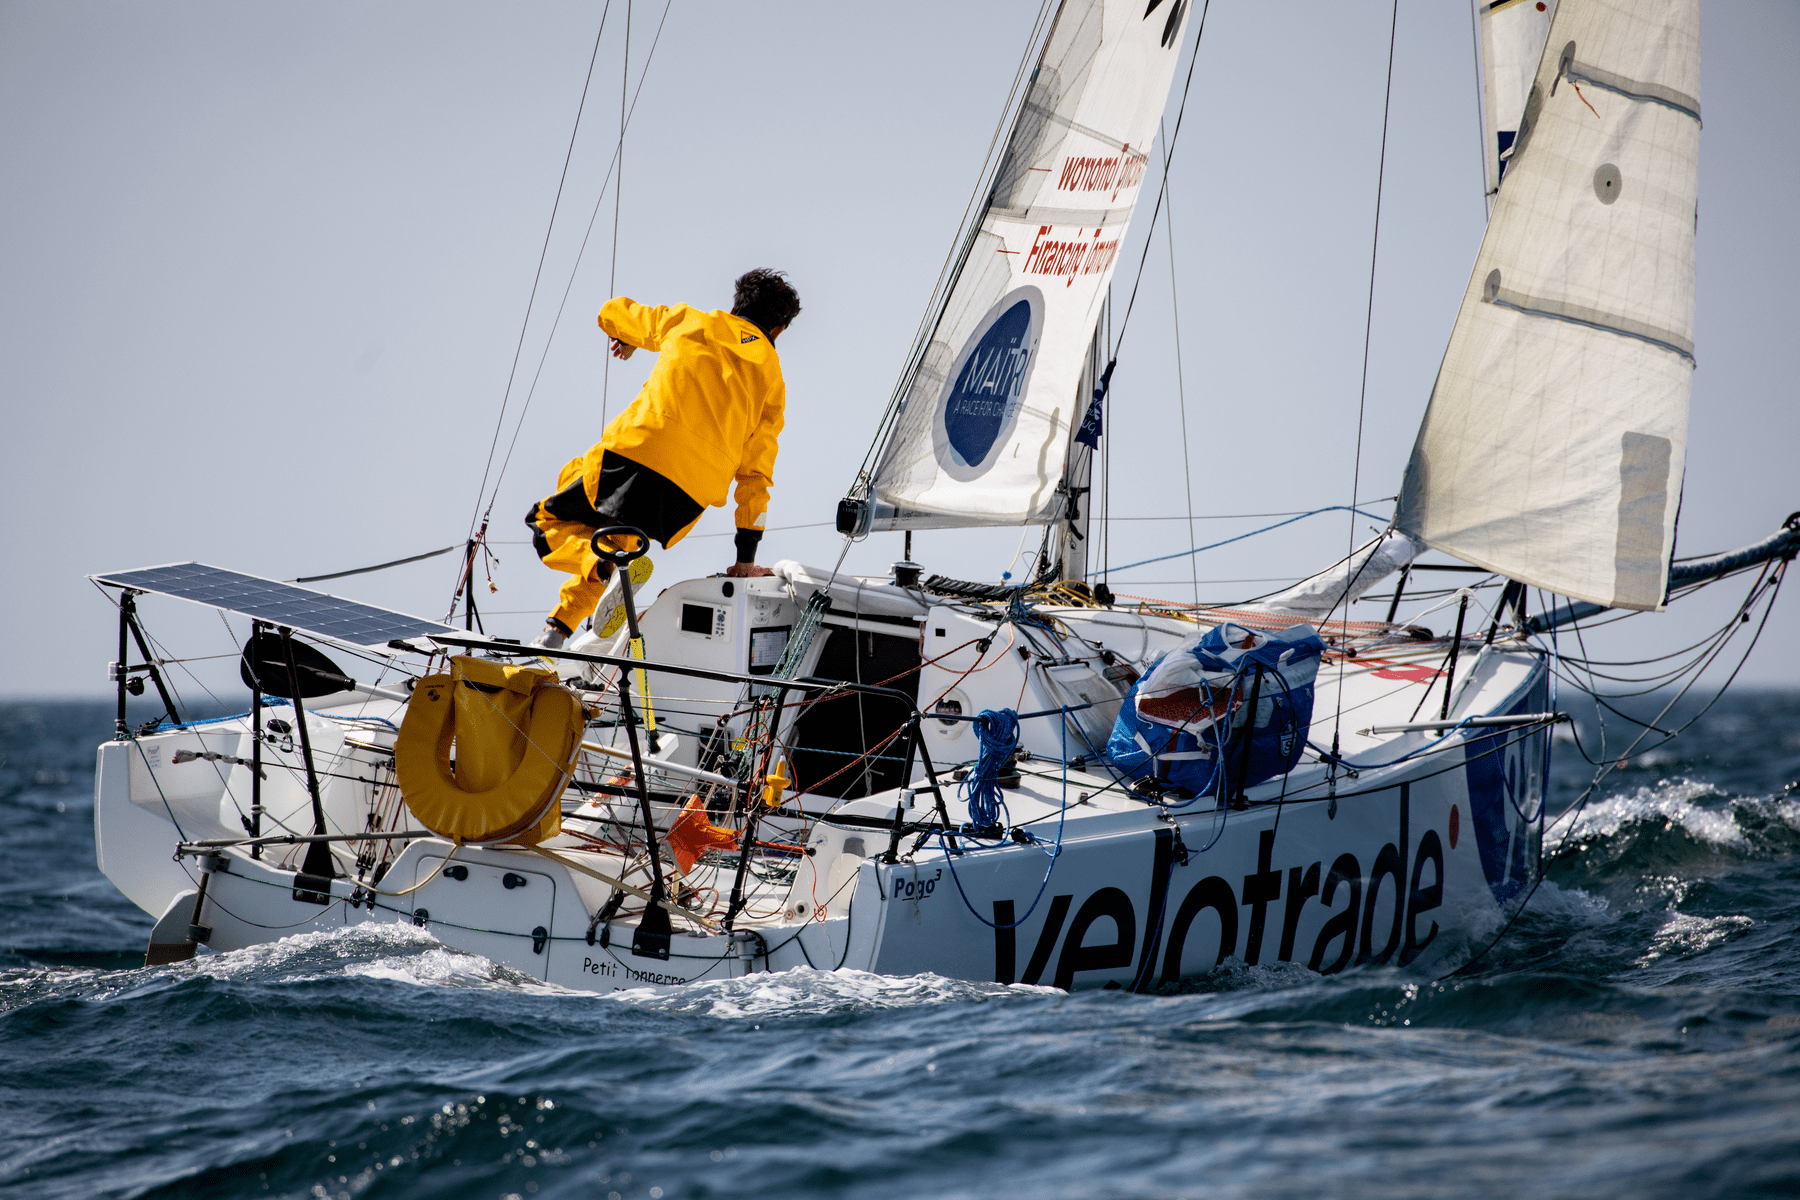 Close-up shot of the stern of the Velotrade sailboat at the Mini Gascogna 2021 preparation race for the Mini Transat challenge.